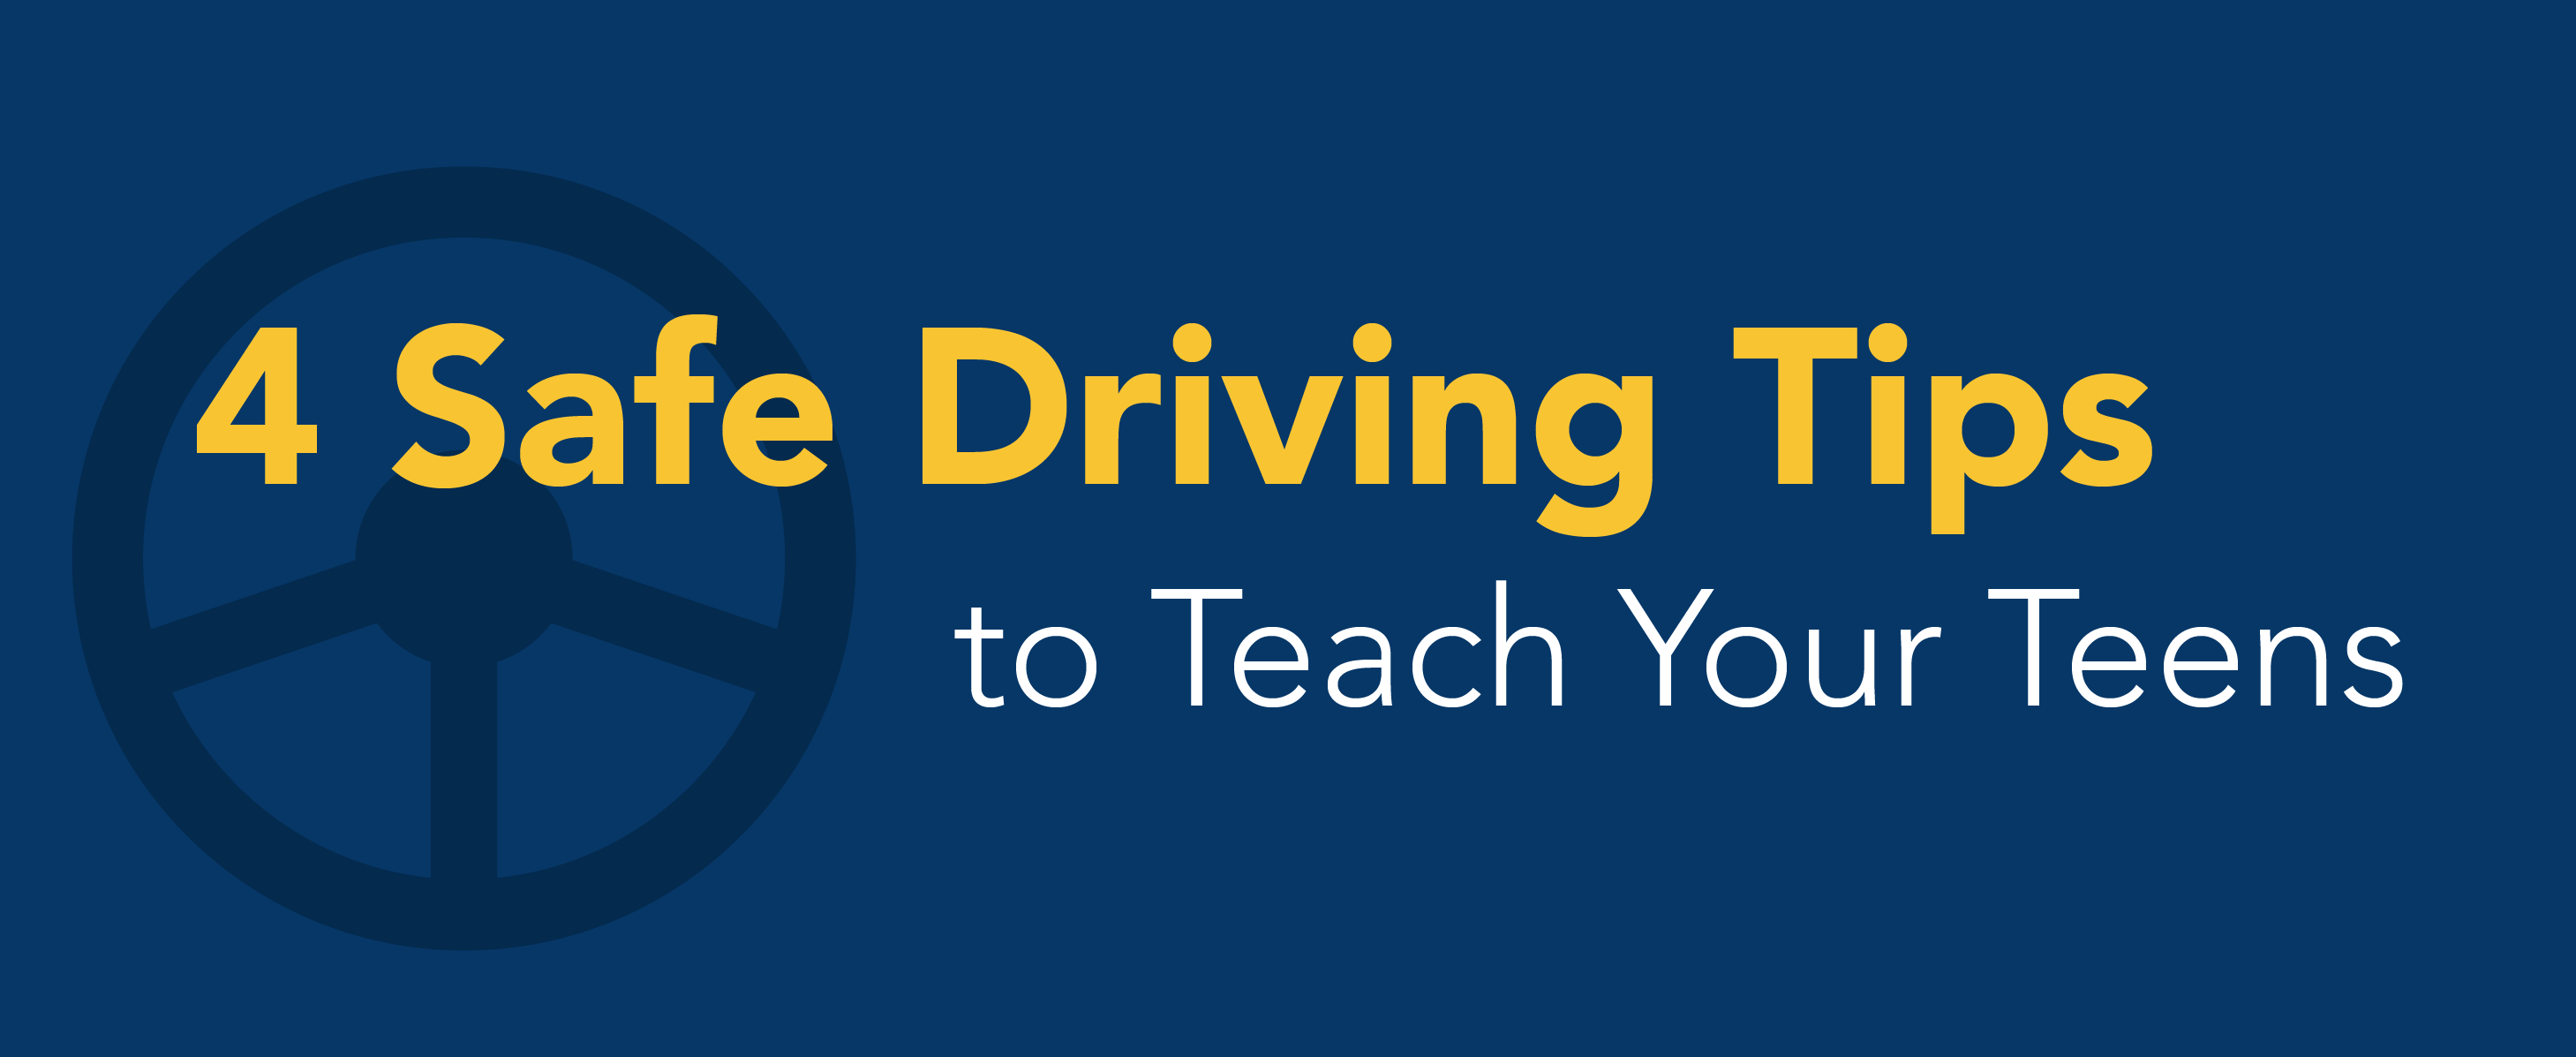 4 safe driving tips to teach your kids.